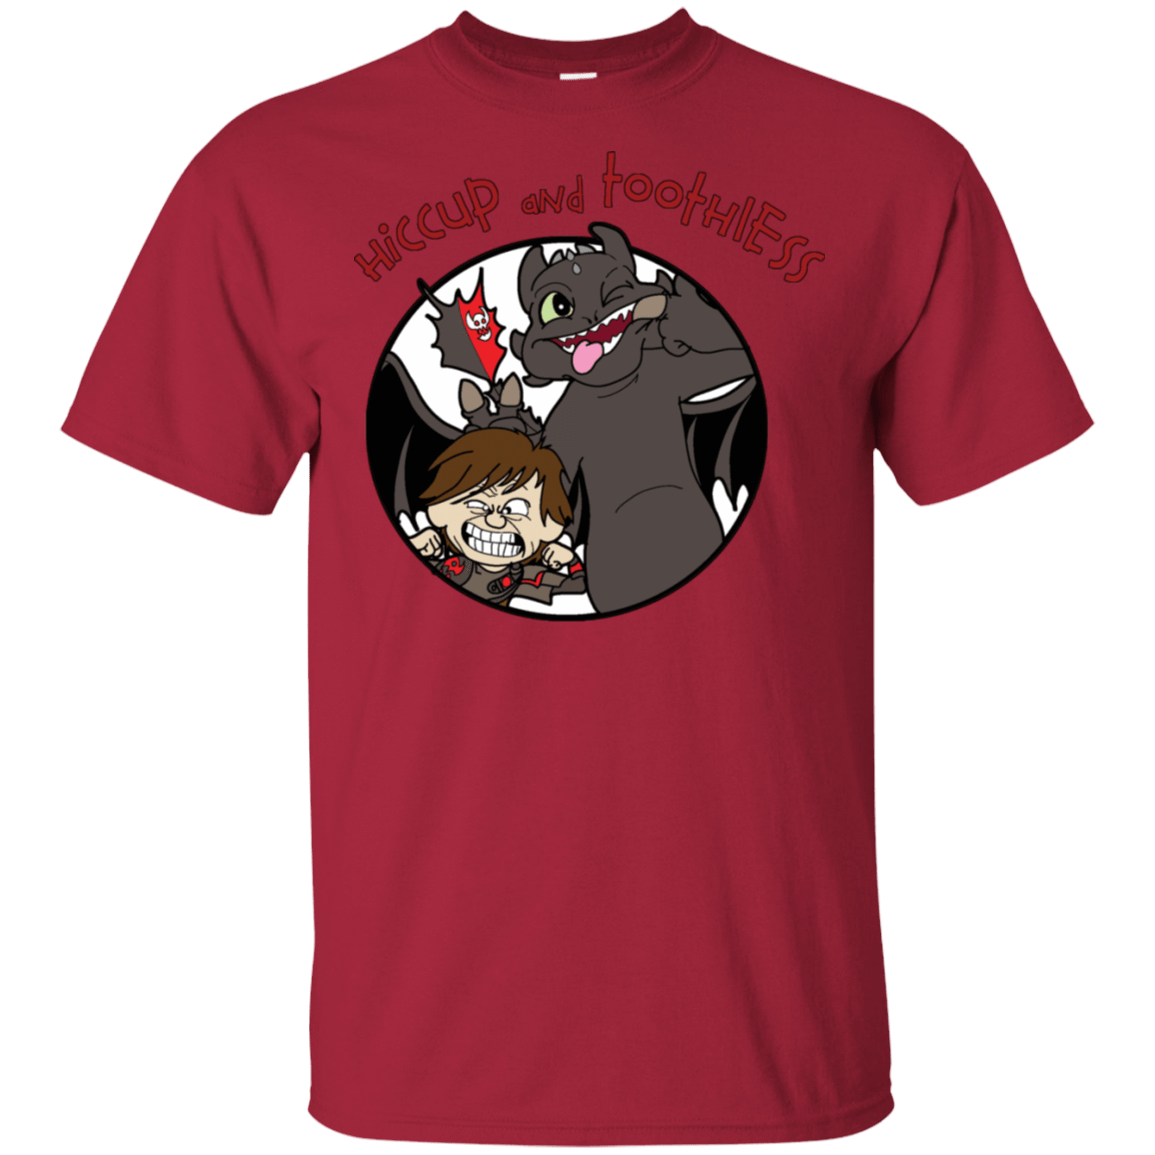 T-Shirts Cardinal / S Hiccup and Toothless T-Shirt